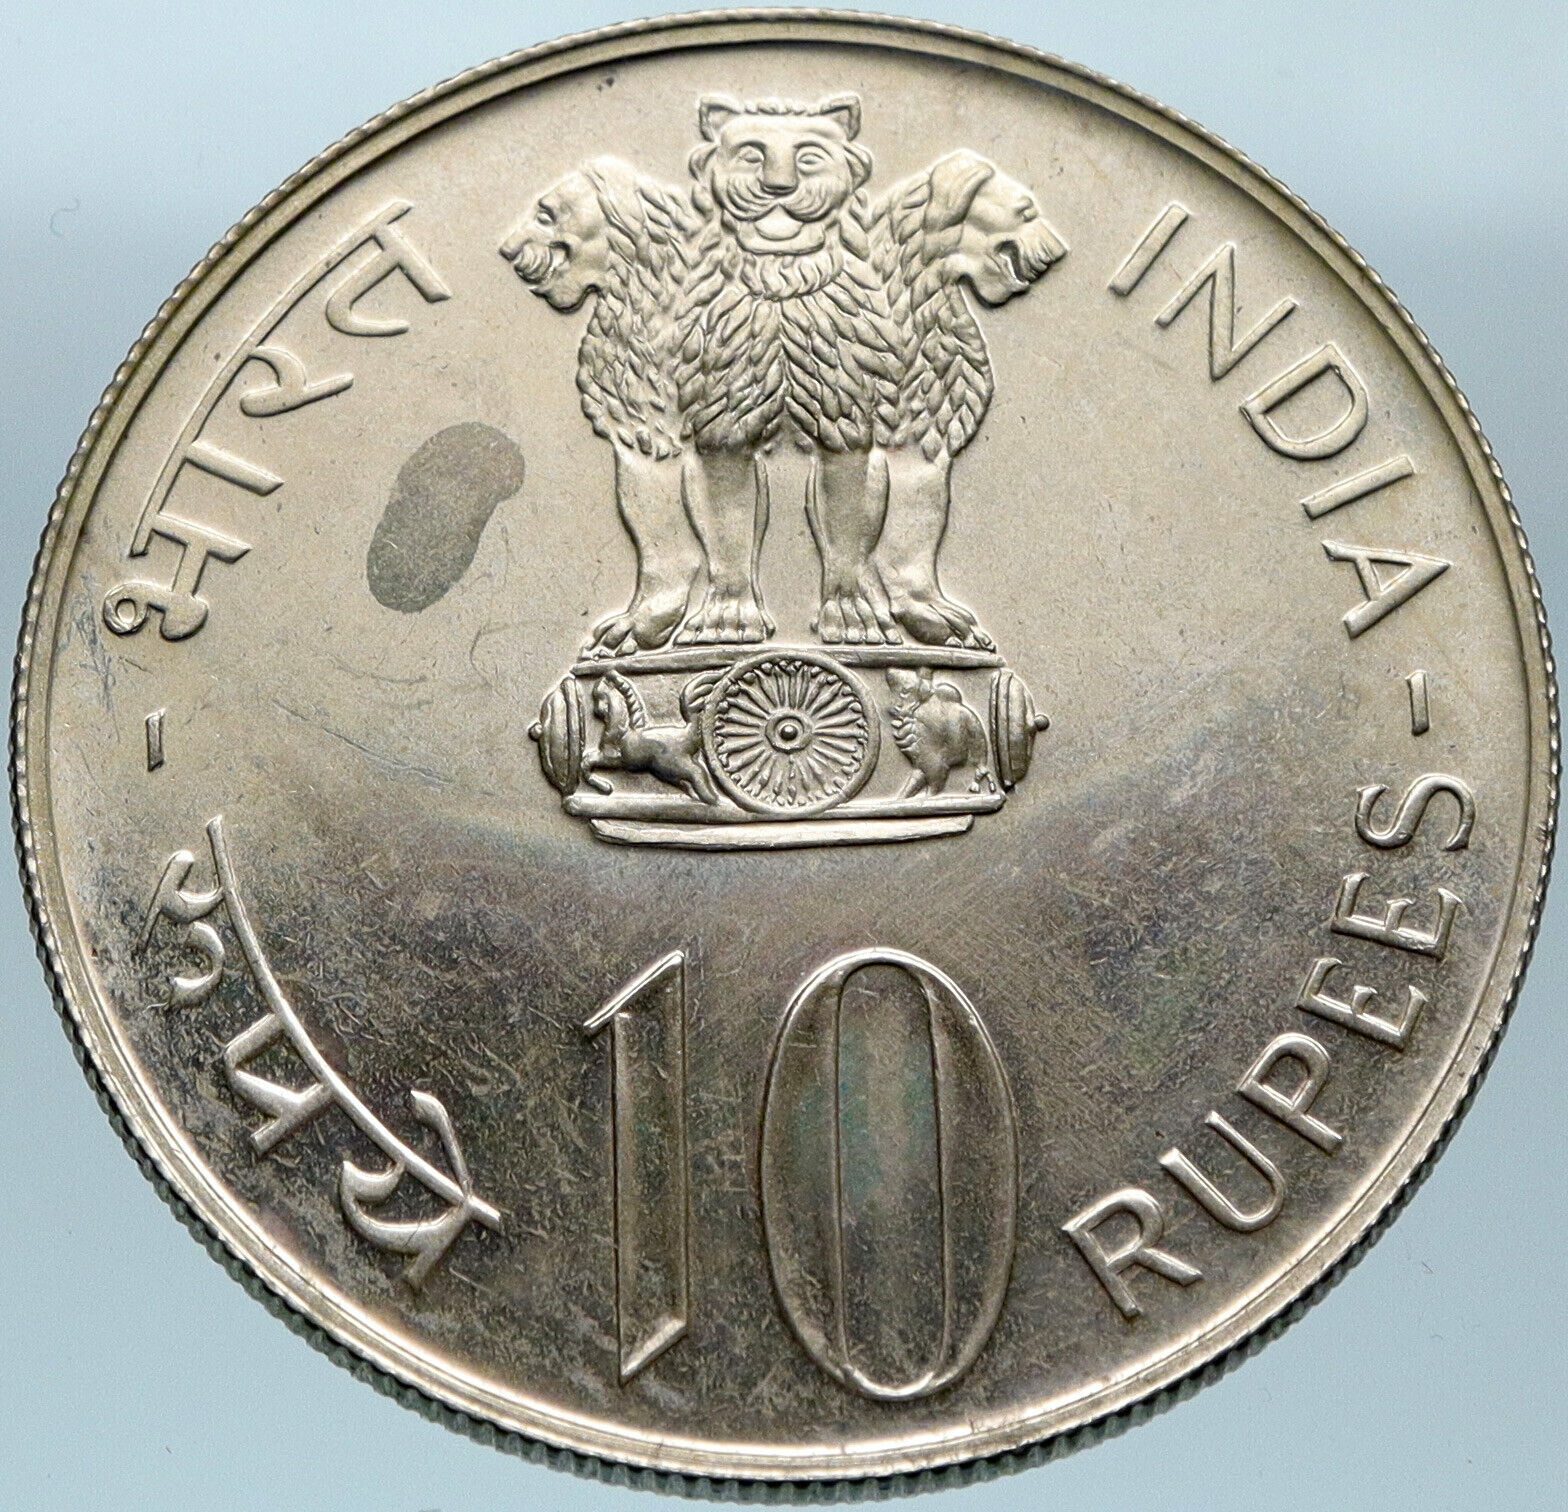 1973 INDIA FAO - Grow More Food Wheat Lions Genuine Silver 10 Rupee Coin i82763